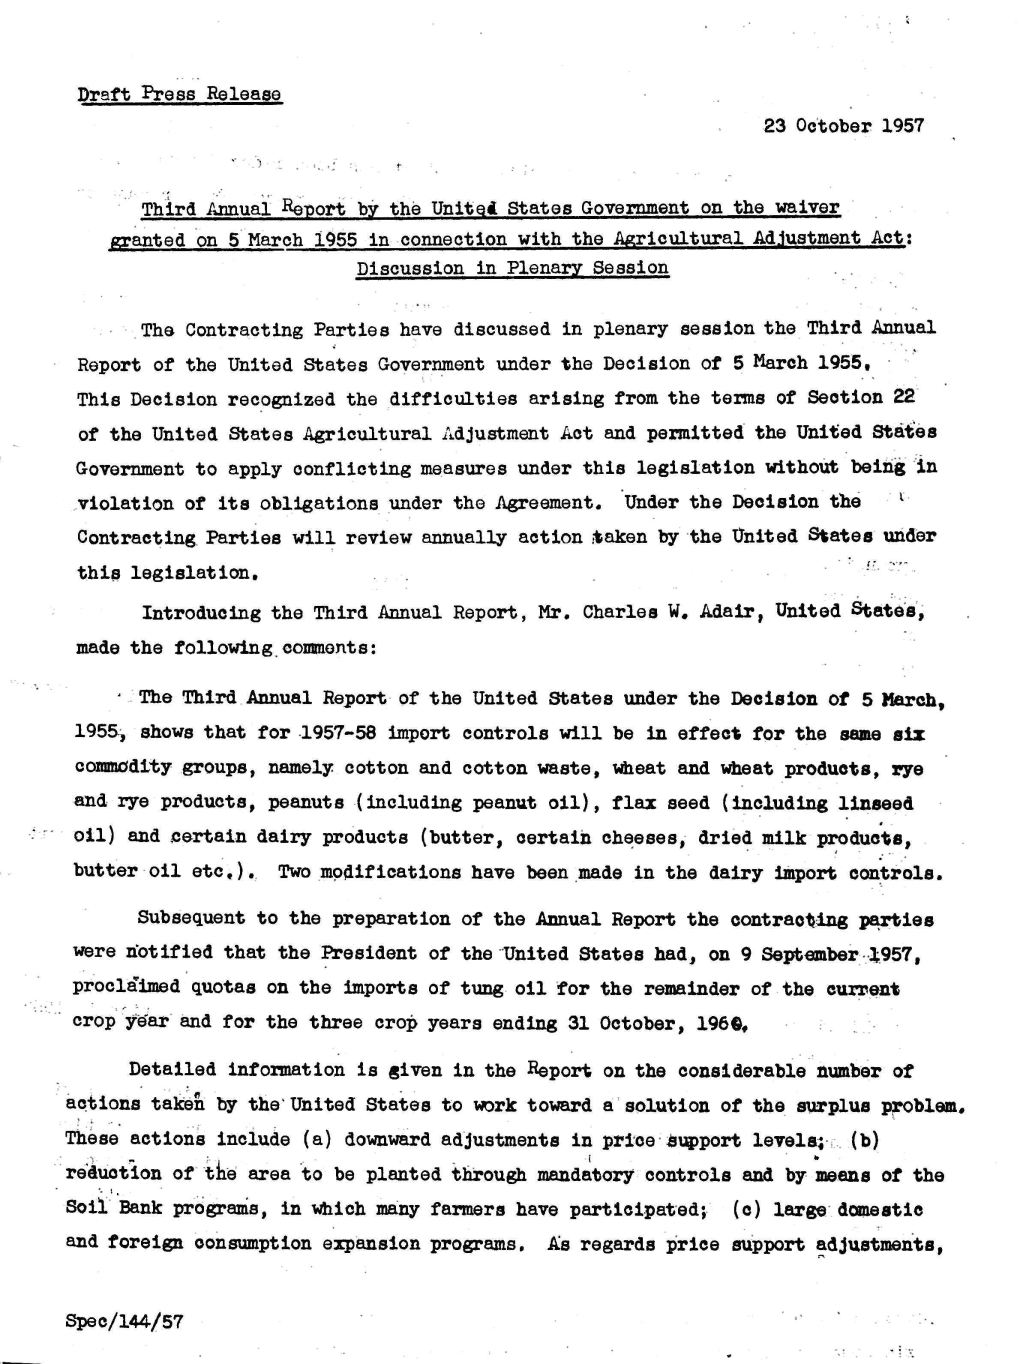 Draft Press Release 23 October 1957 Third Annual Report by the Unite